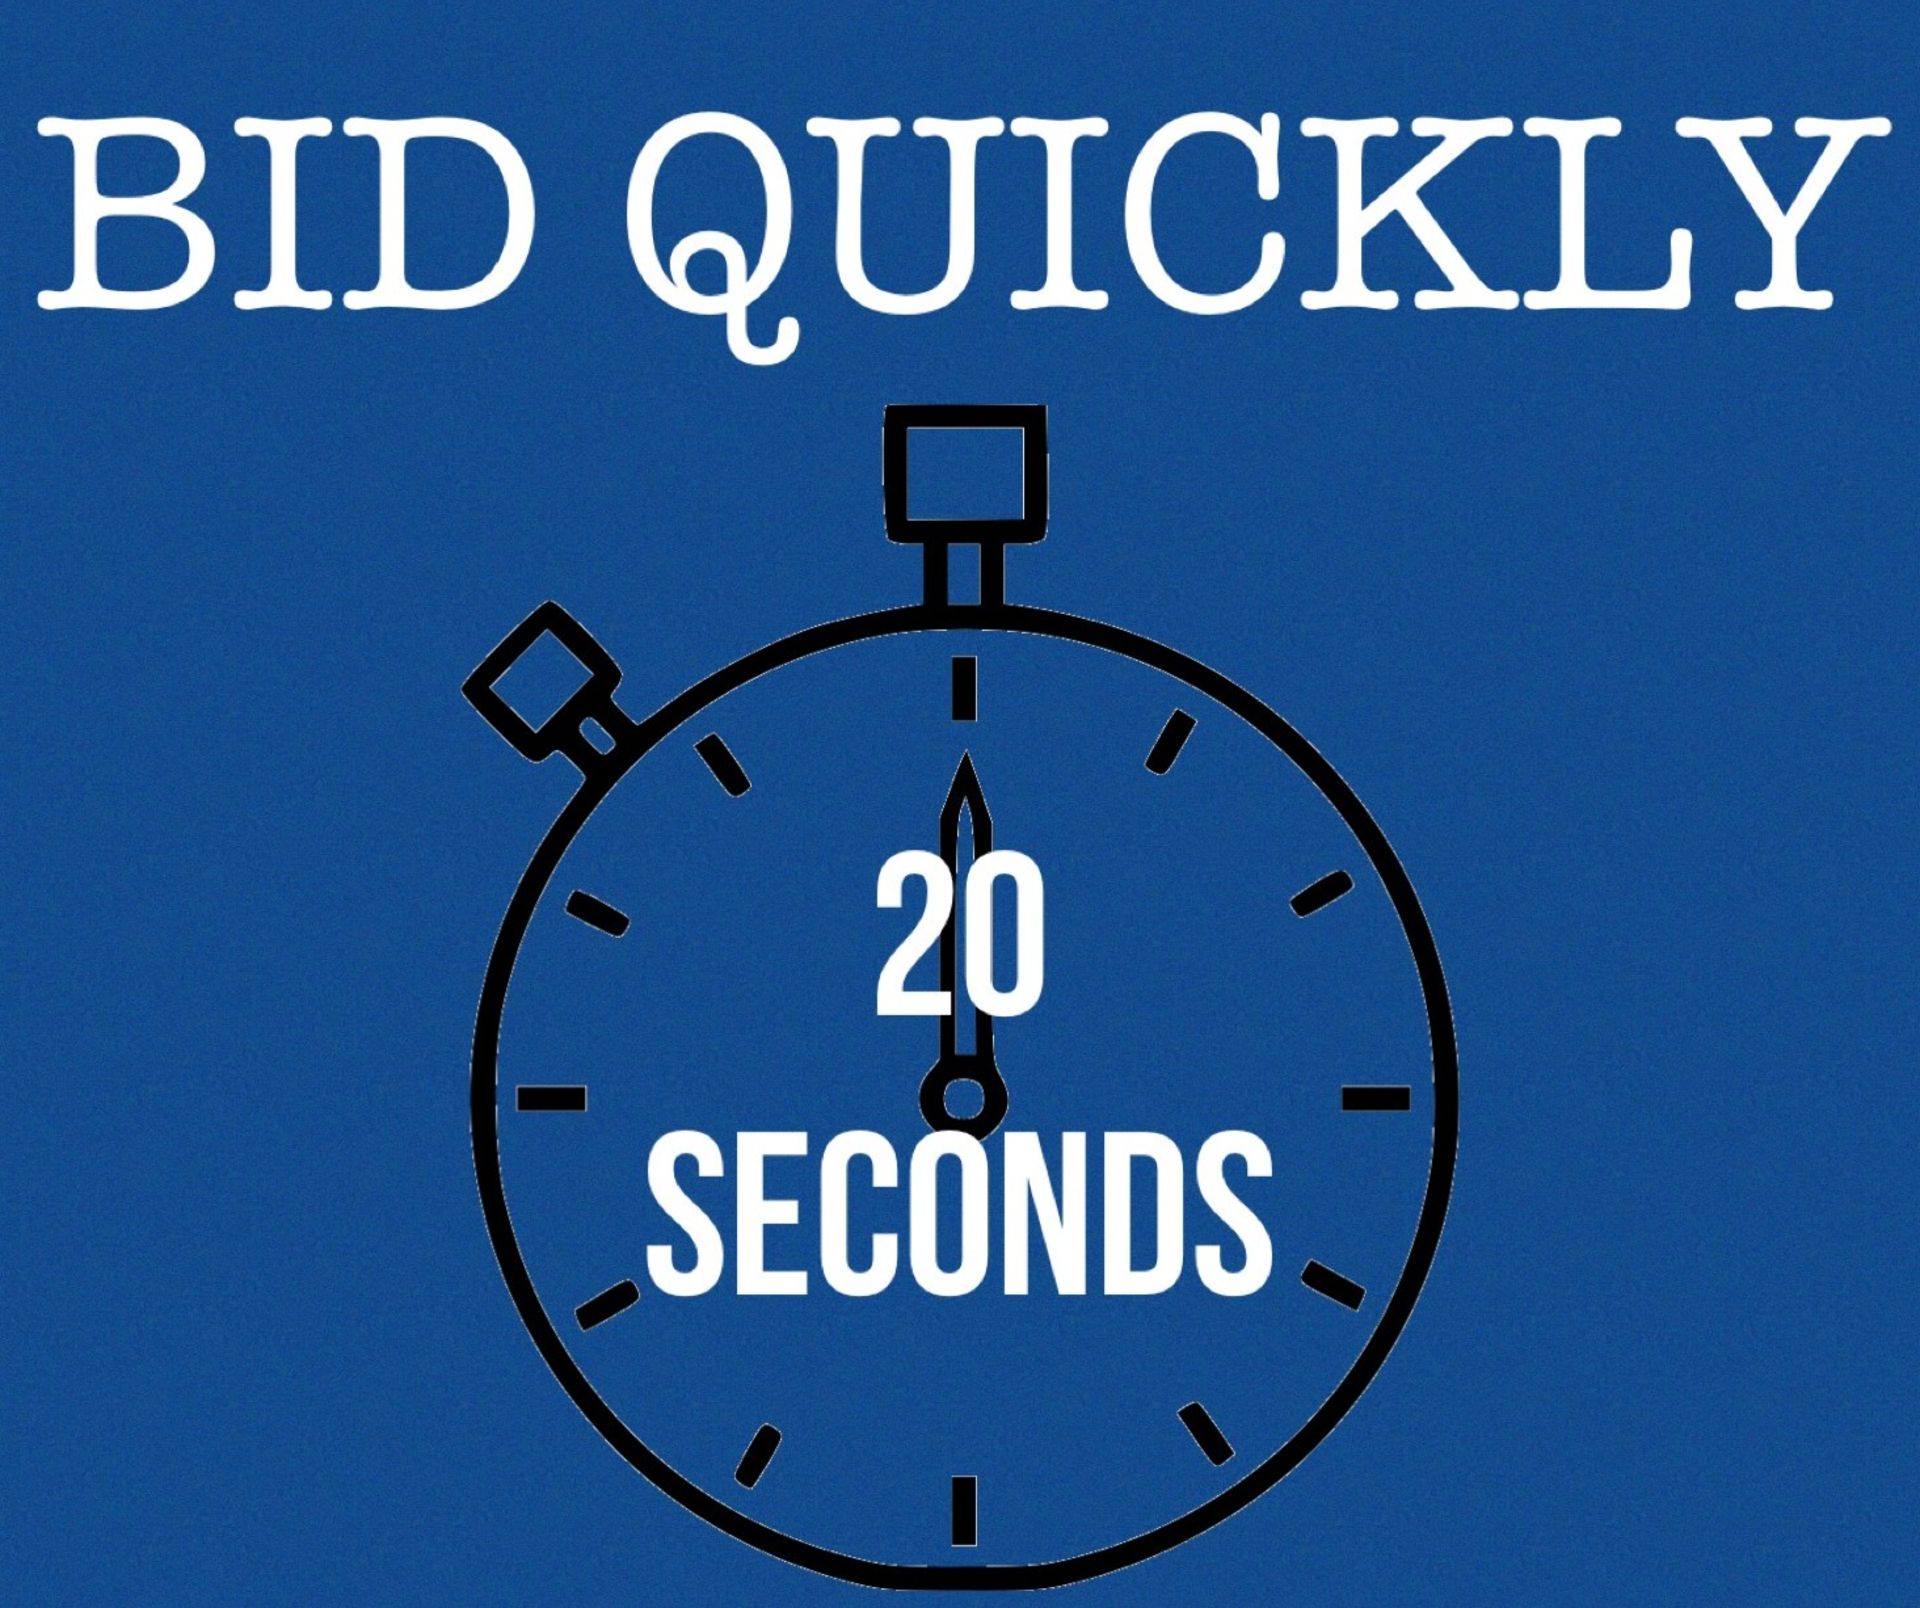 BID QUICKLY, LOTS WILL BE ENDING EVERY 20 SECONDS AT THIS AUCTION!